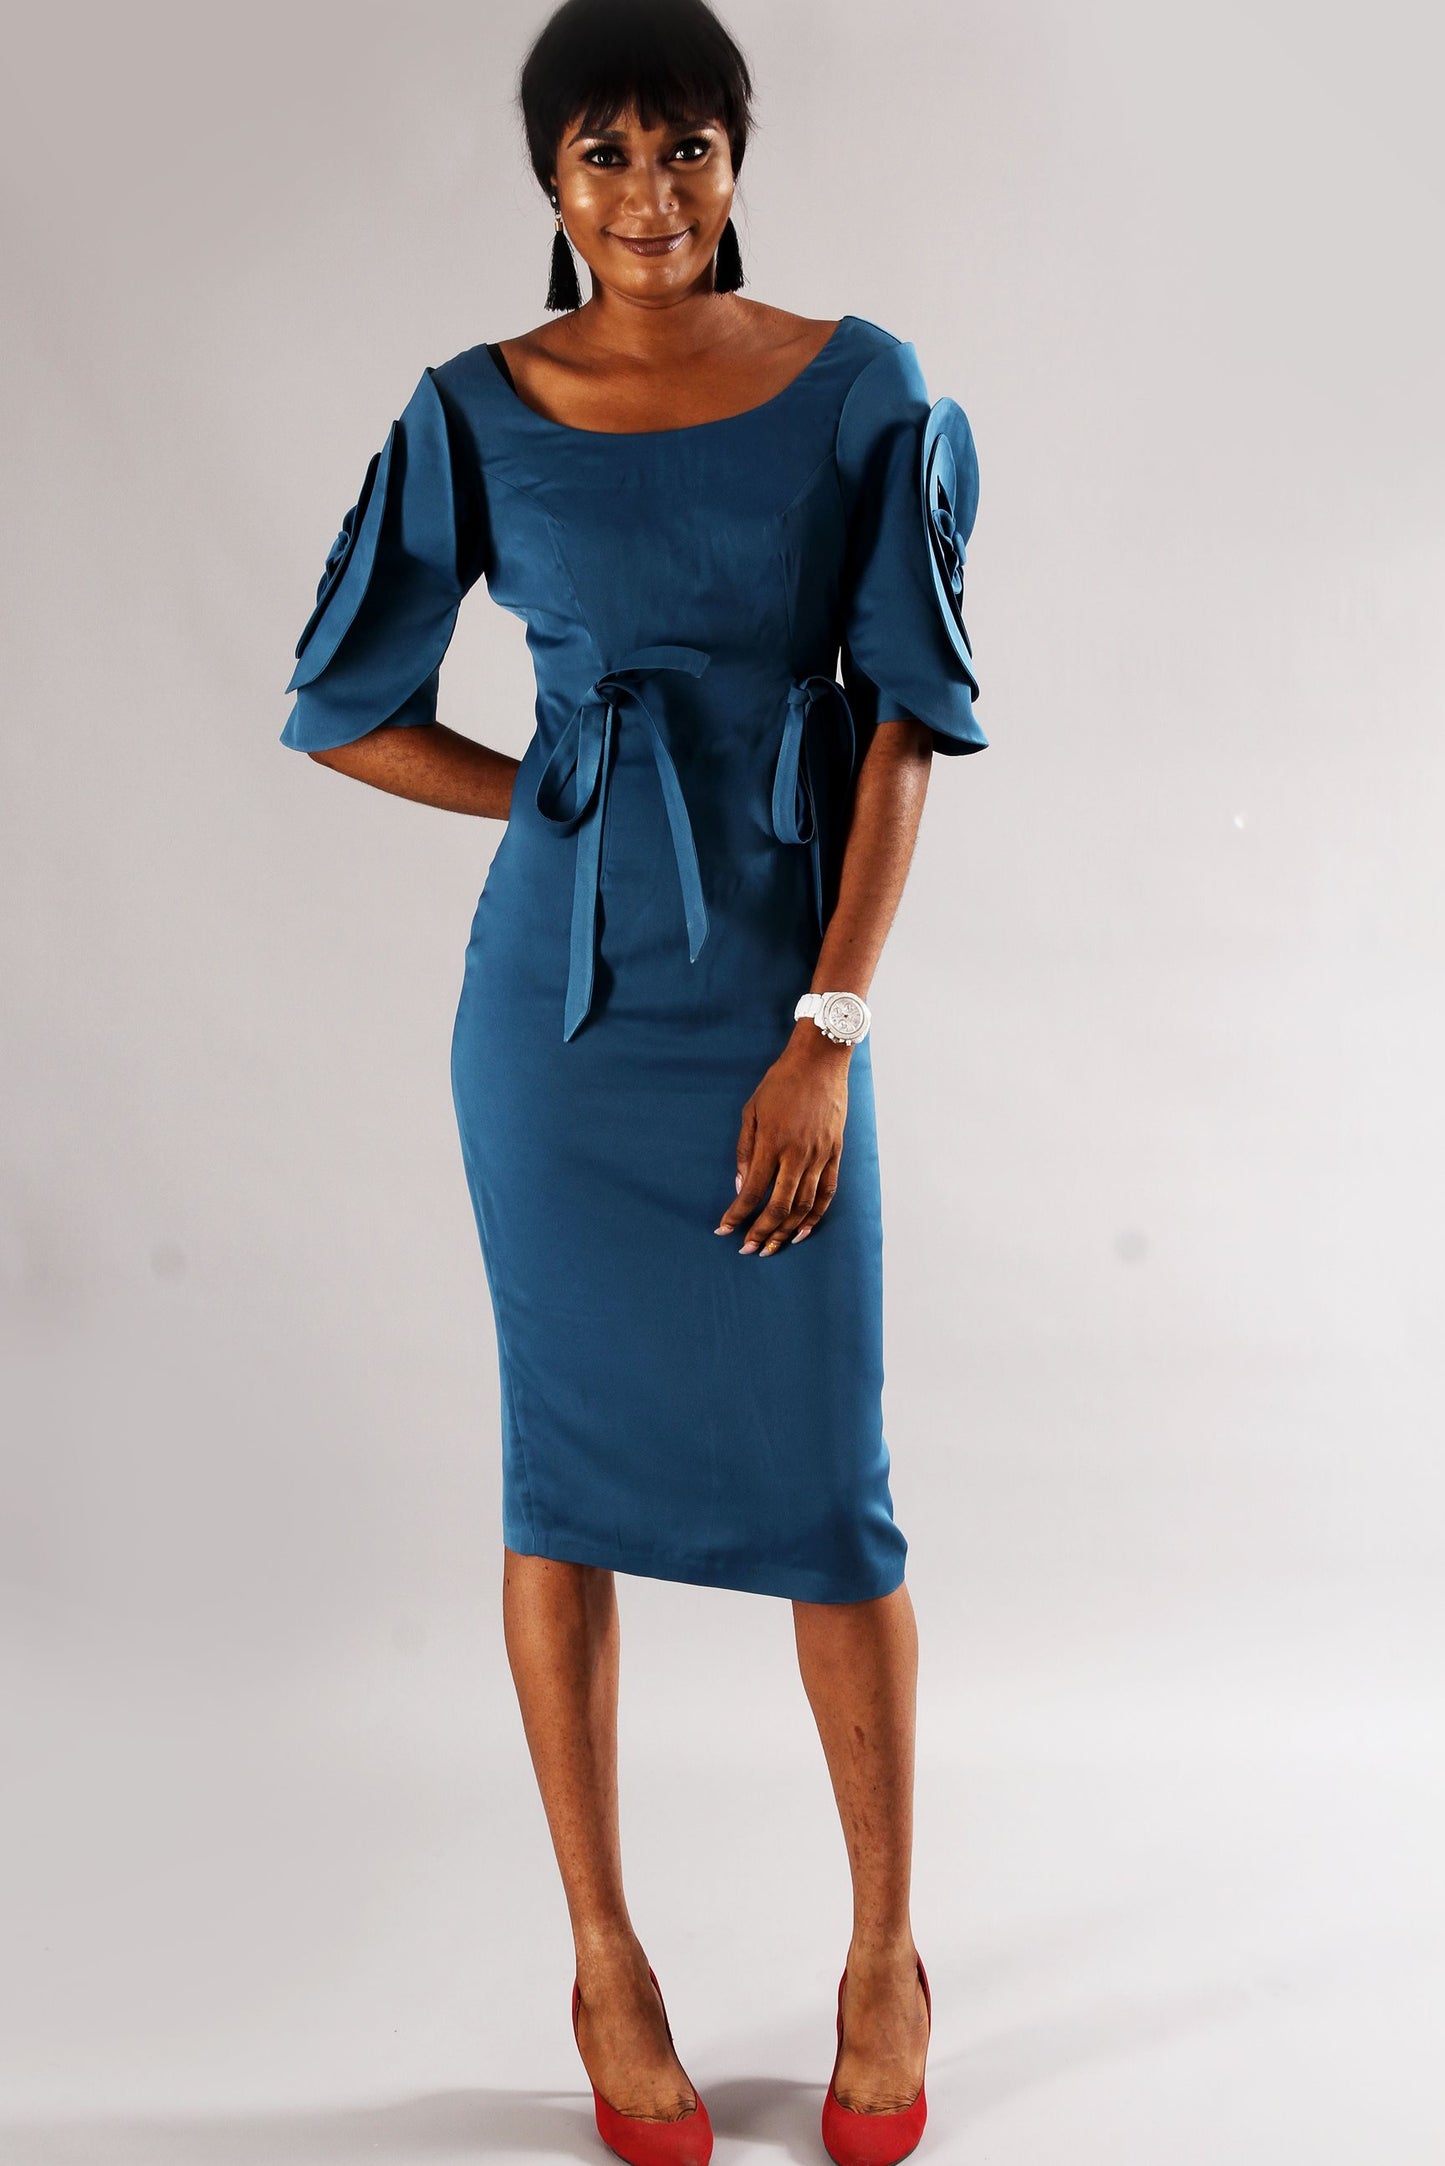 Teal Blue Deconstruct Formal Fitted Party Statement Dress